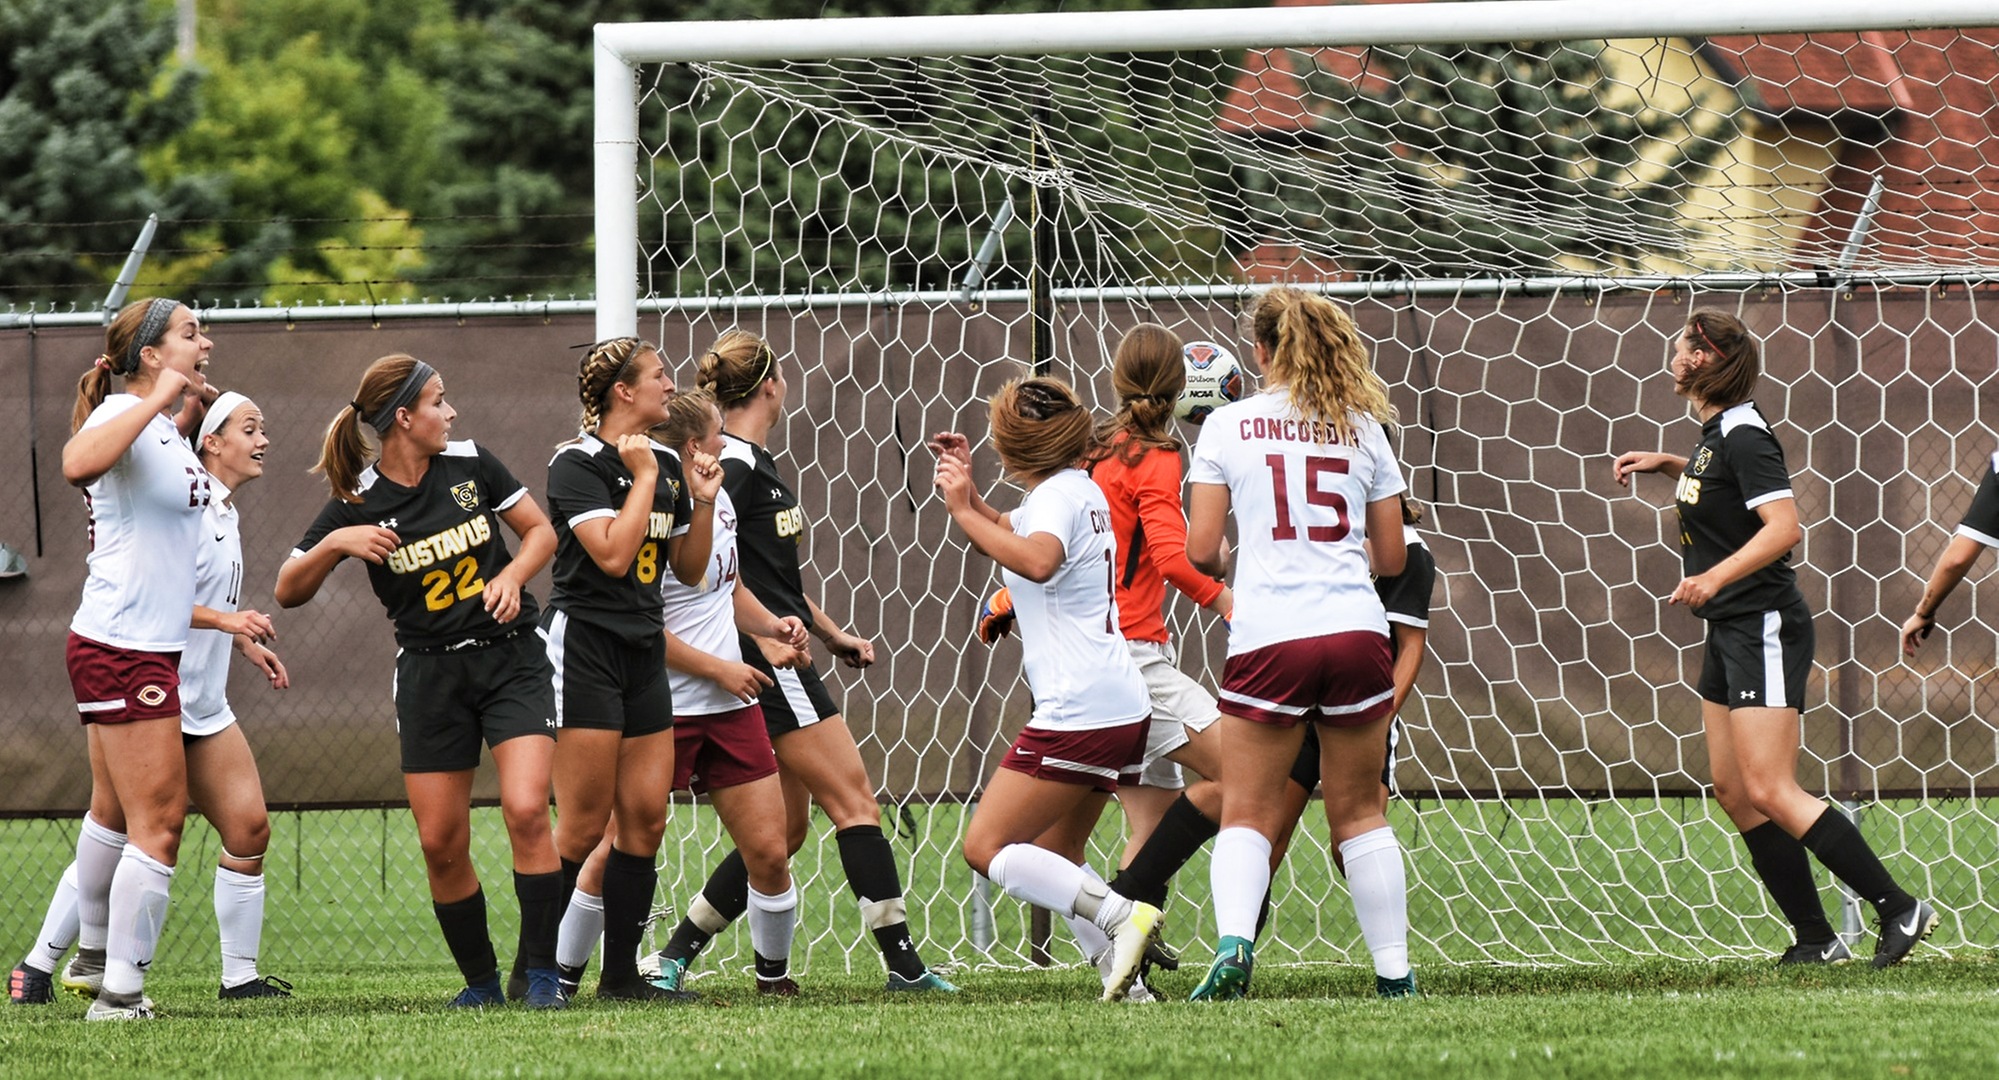 Abby Westbee (2nd CC player from right) watches her header go into the net for the first goal in the Cobbers' game with Gustavus.